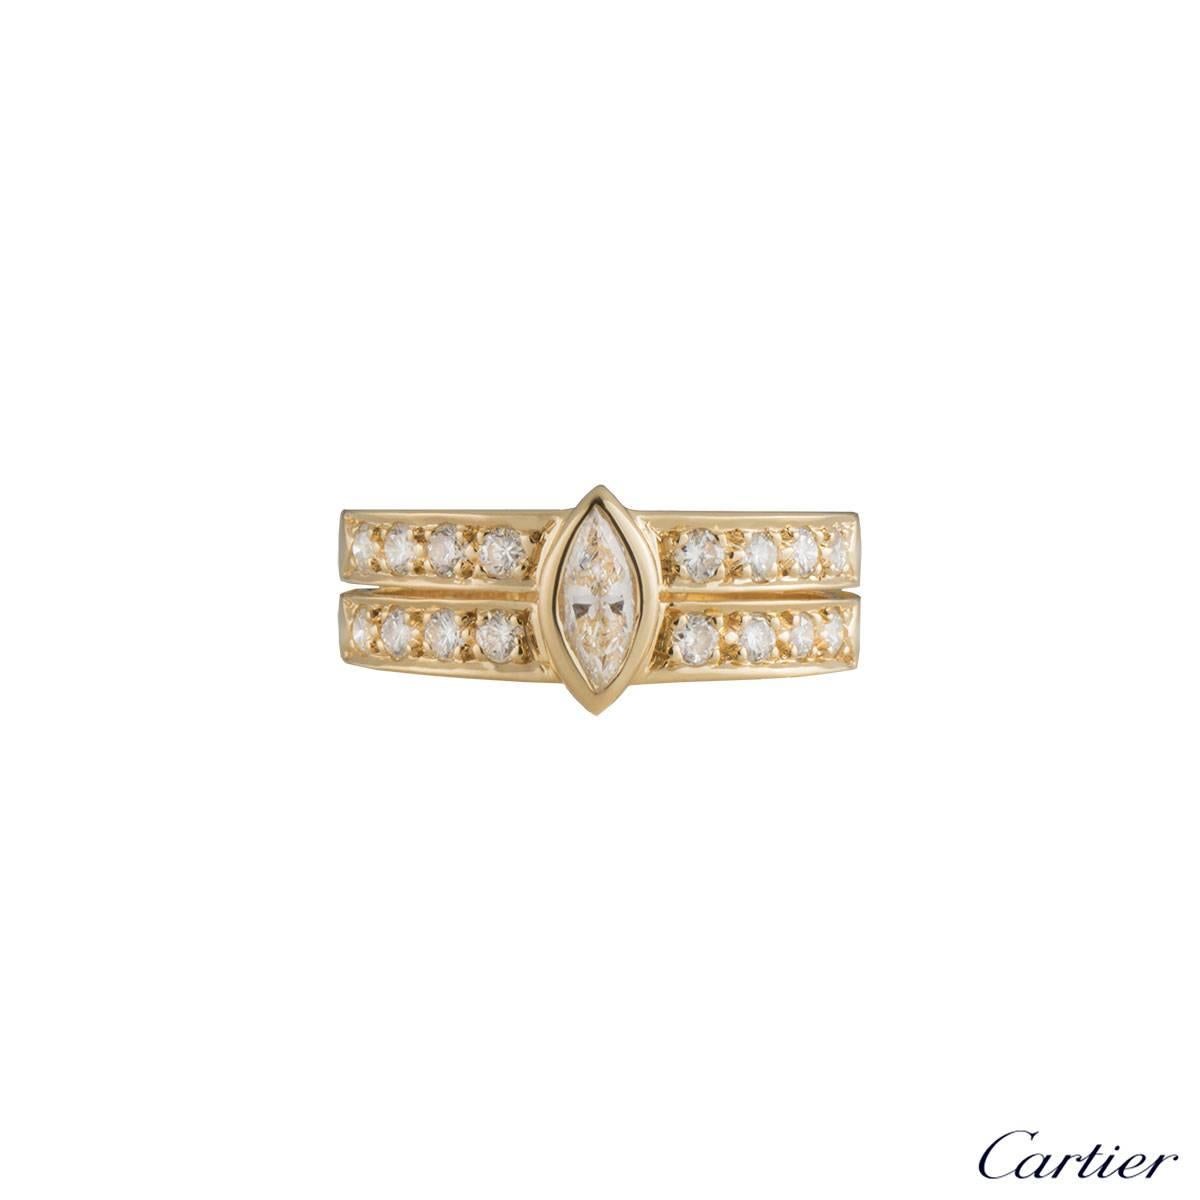 A unique 18k yellow gold diamond Cartier ring. The ring comprises of a marquise cut diamond in a rubover setting with a total weight of approximately 0.35ct, predominantly G colour and VS clarity. Complementing the centre stone are two rows of 4